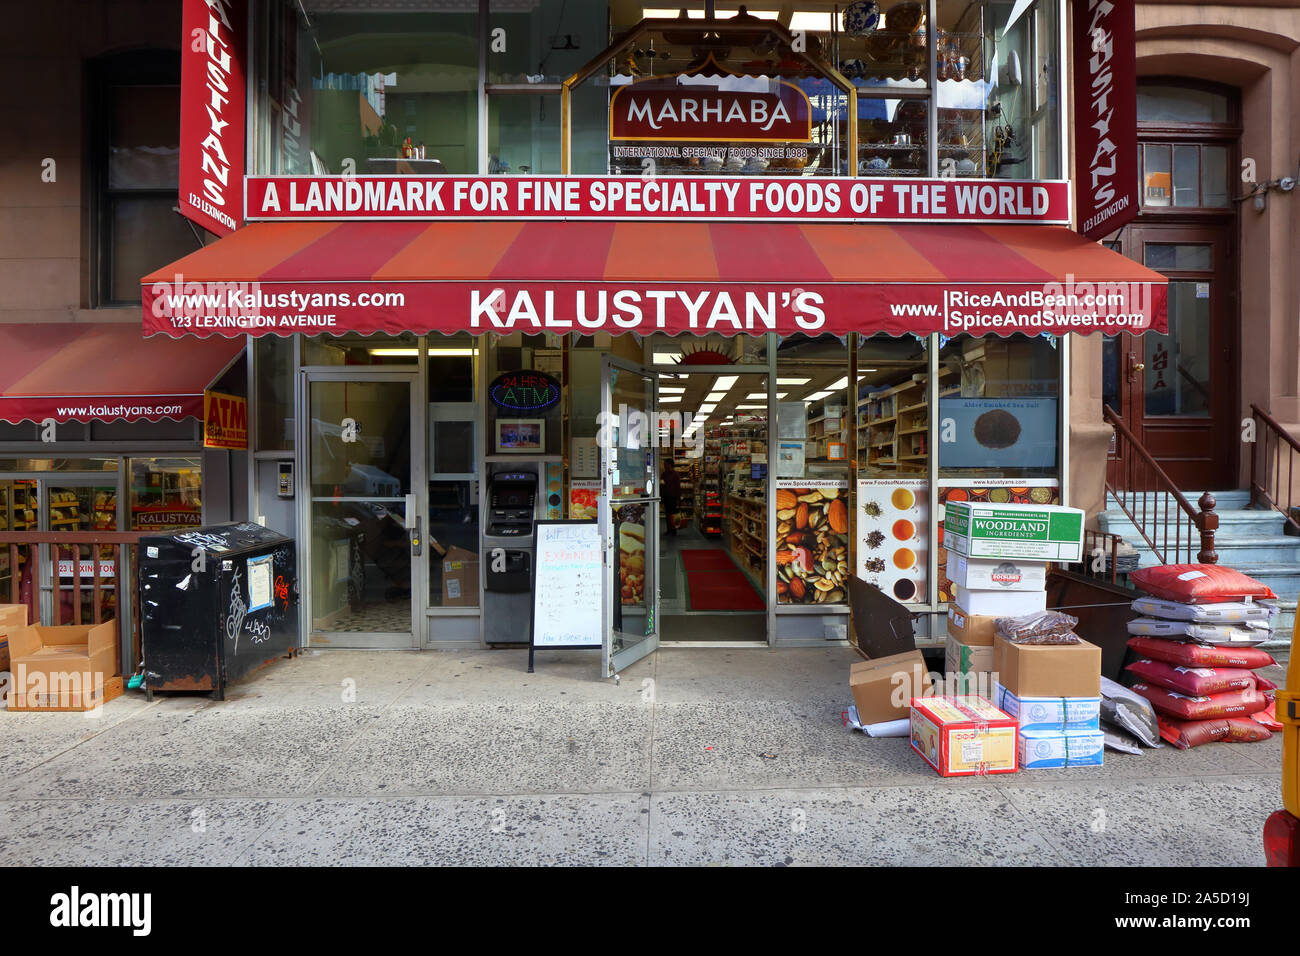 Kalustyan's, 123 Lexington Ave, New York, NY.  exterior storefront of a specialty food market in the Curry Hill area of Manhattan. Stock Photo